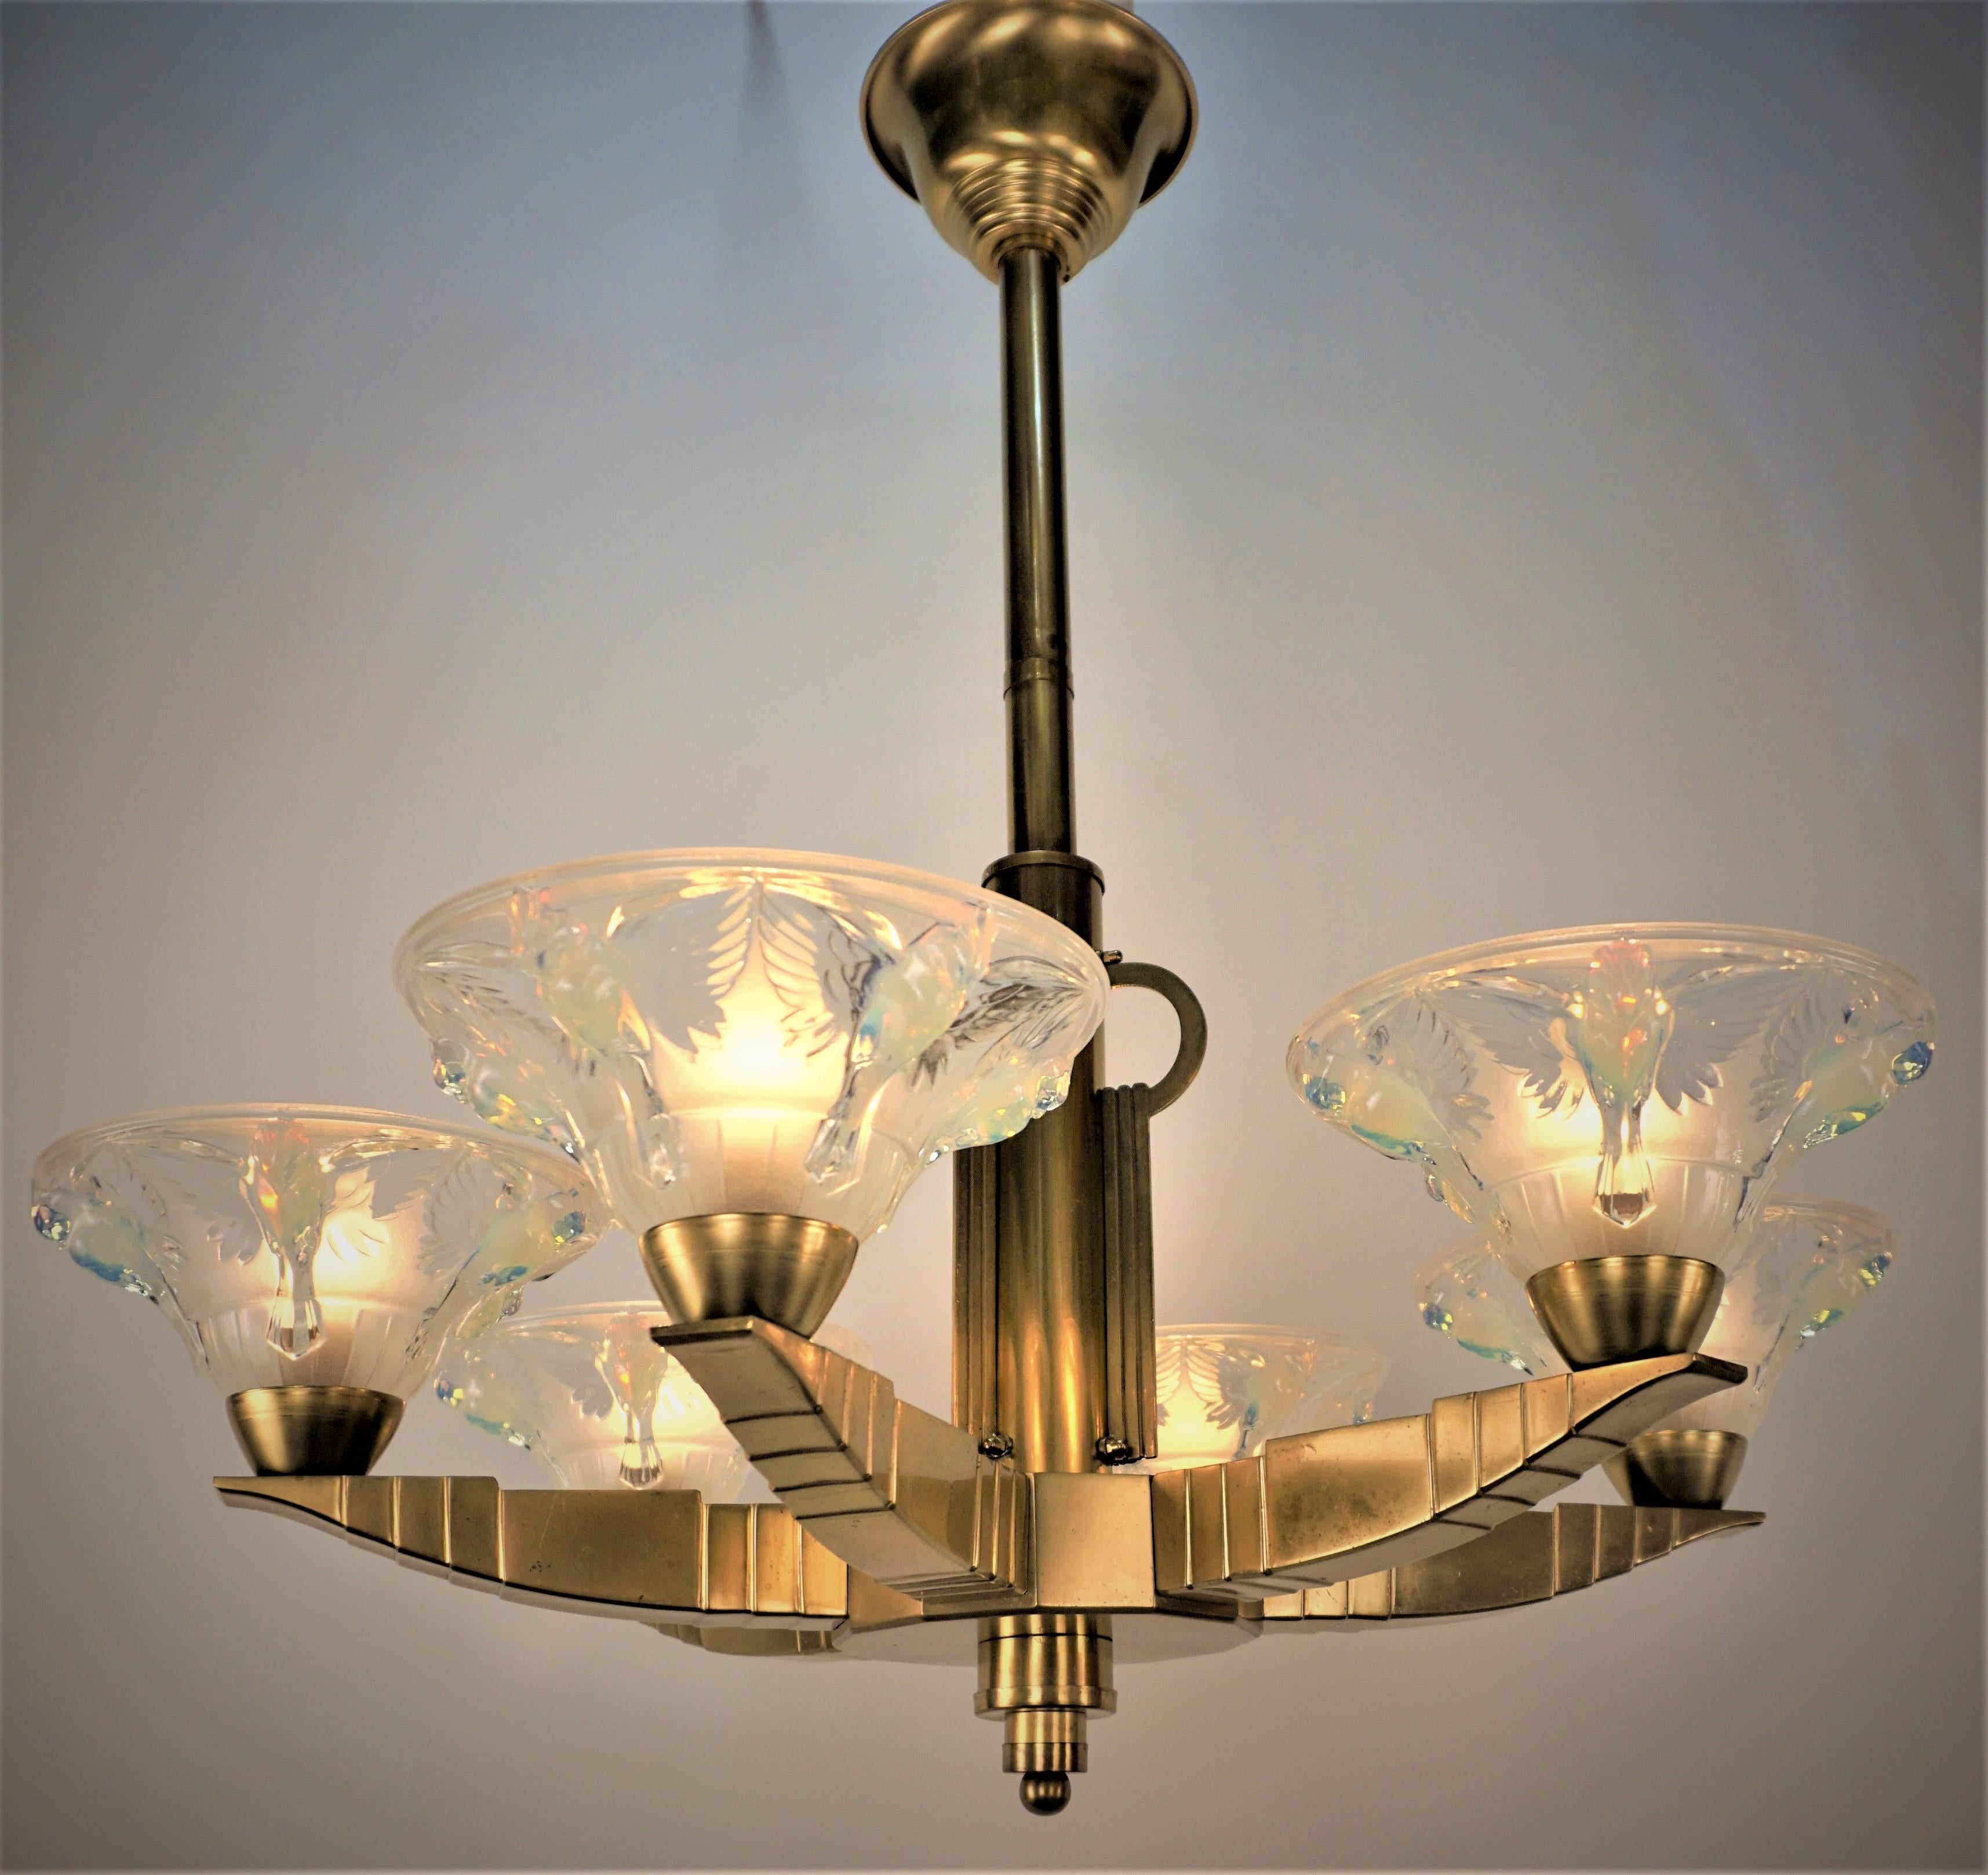 Bronze art deco chandelier with flying bird opalescent honey blue color glass shades. 
Price per chandelier,2 in stock and sold individually.